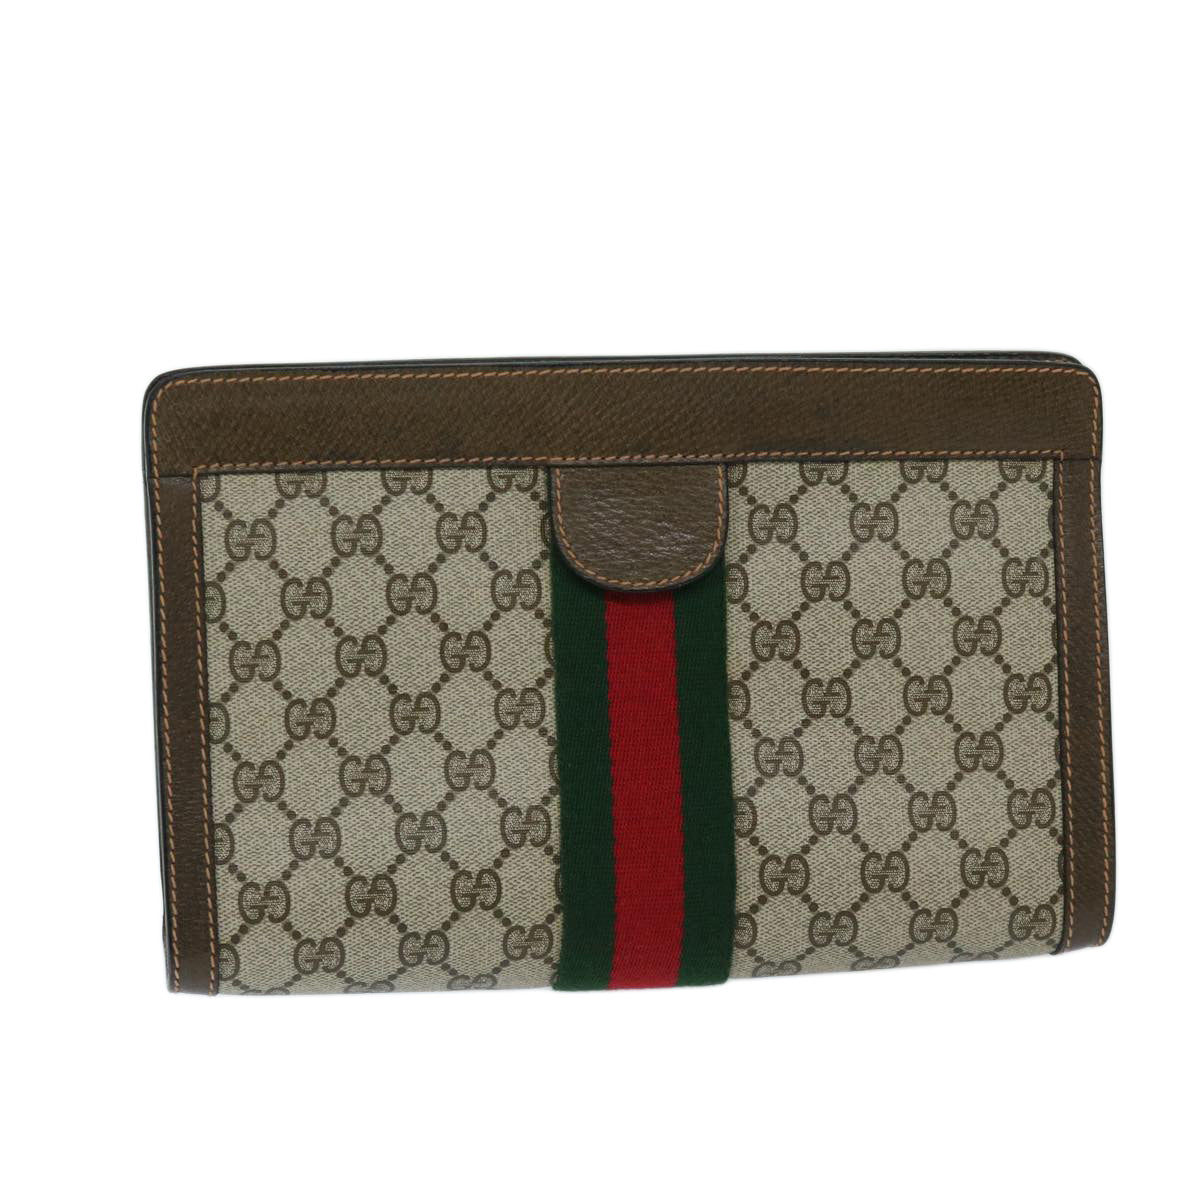 GUCCI GG Canvas Web Sherry Line Clutch Bag PVC Beige Green Red Auth yk11340 - 0